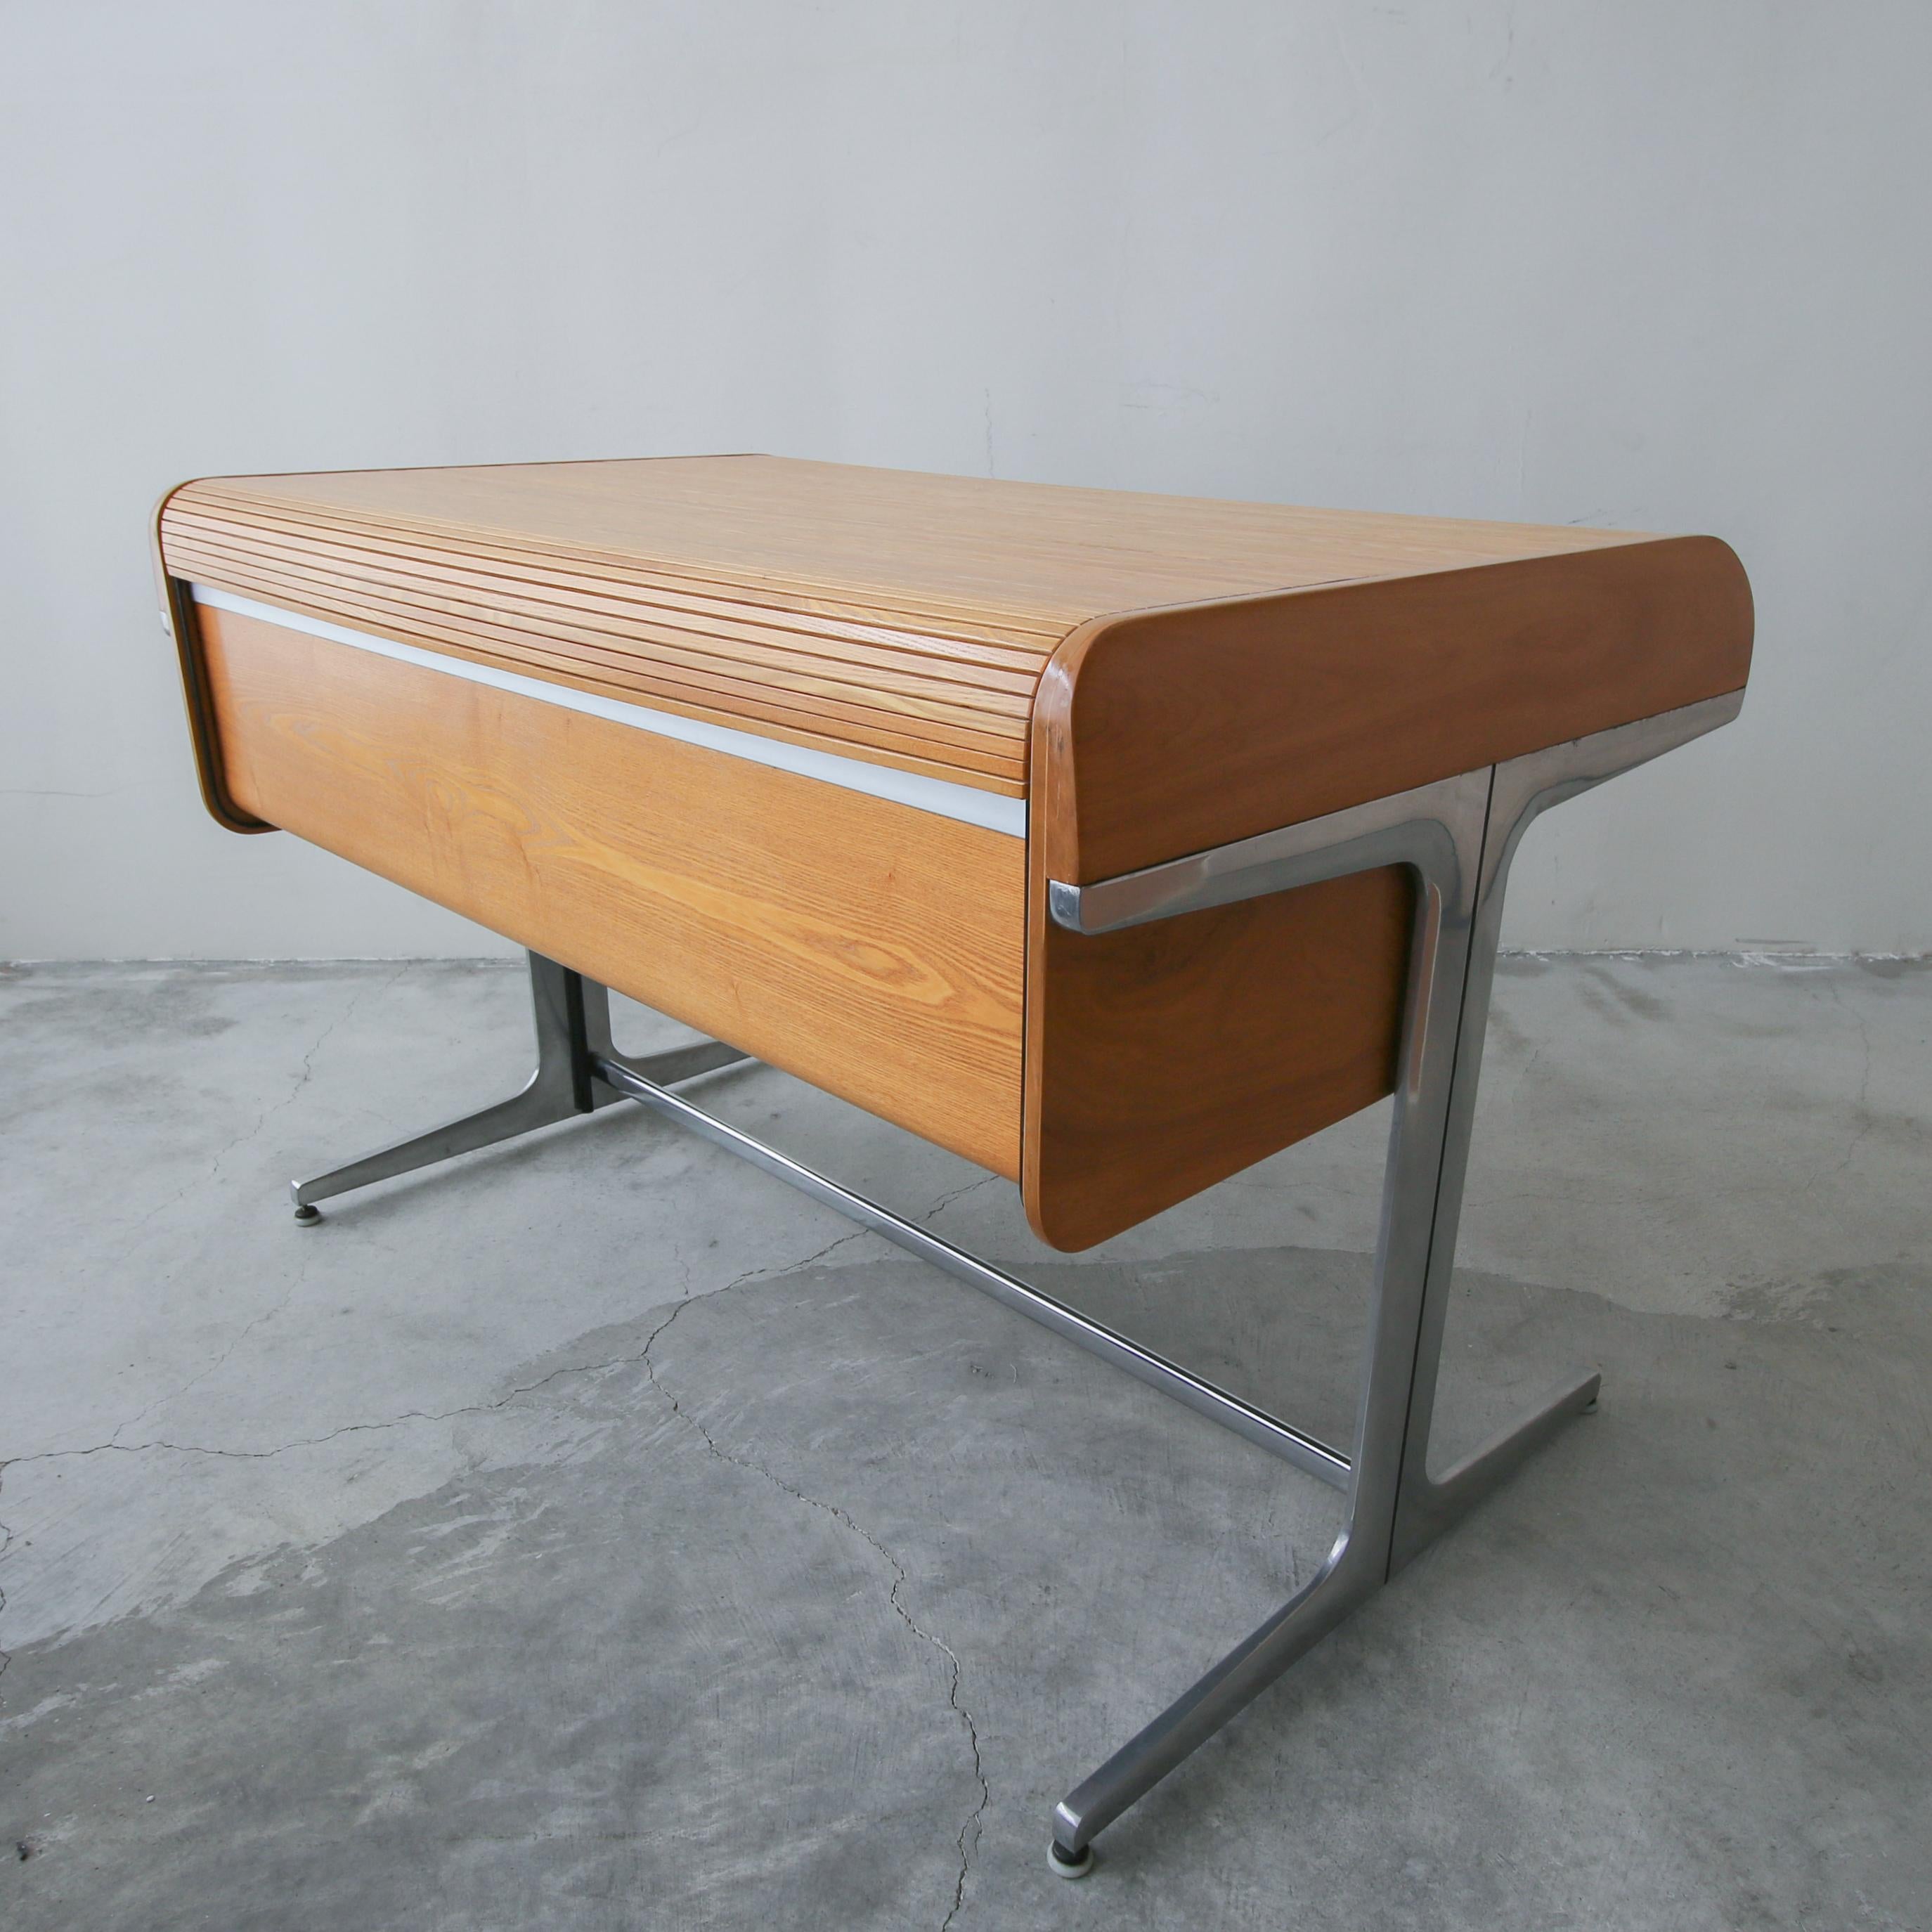 Extremely rare George Nelson for Herman Miller Action Office desk in all ashwood. I cannot find another example of this desk with the all wood sides complimenting the ash wood retracting tambour top. The Action Office Series was exclusively